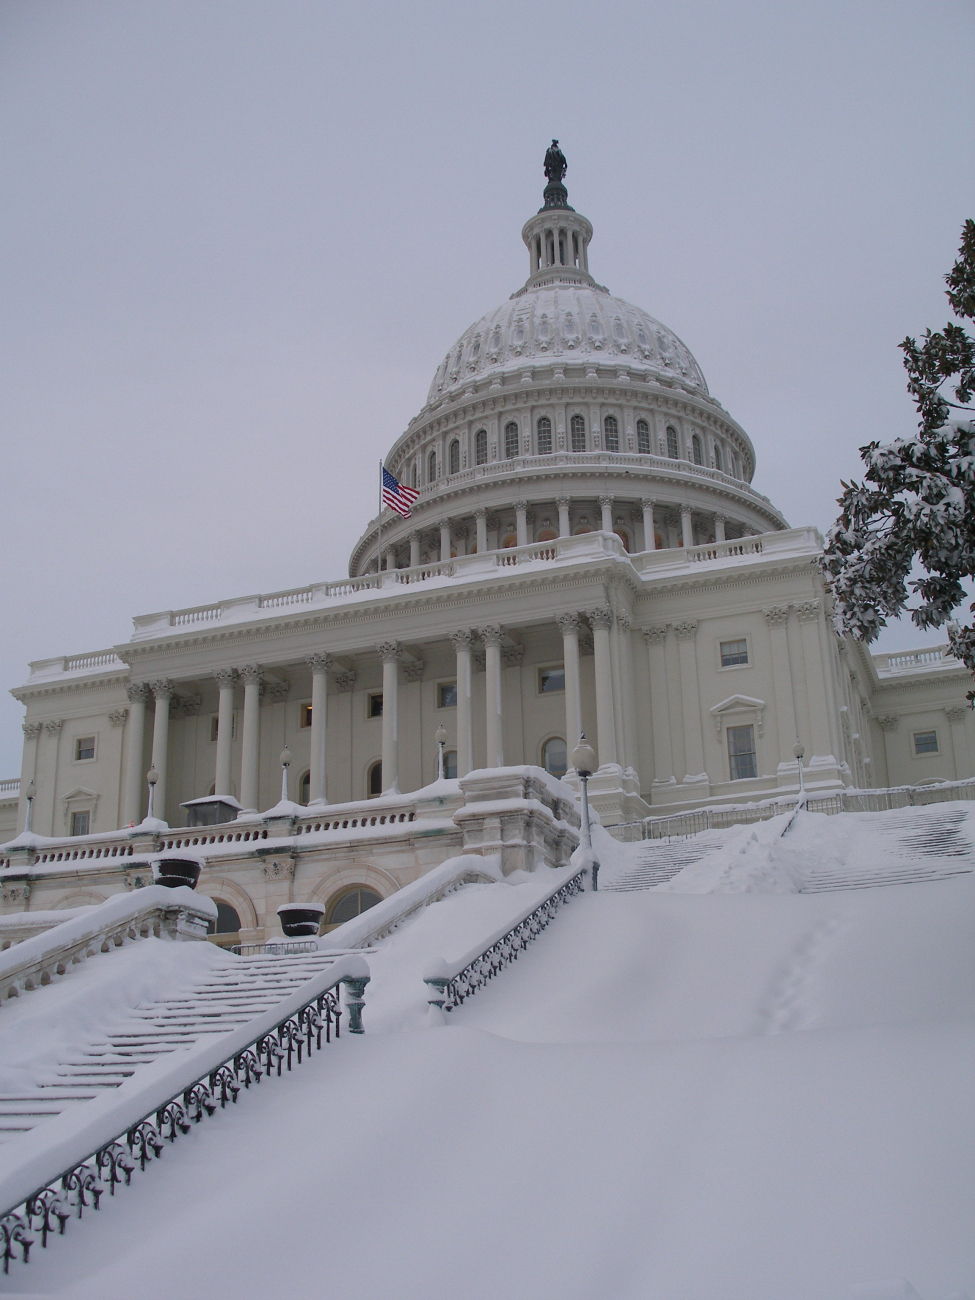 The Capitol Building adorned with snow and the Statue of Freedom